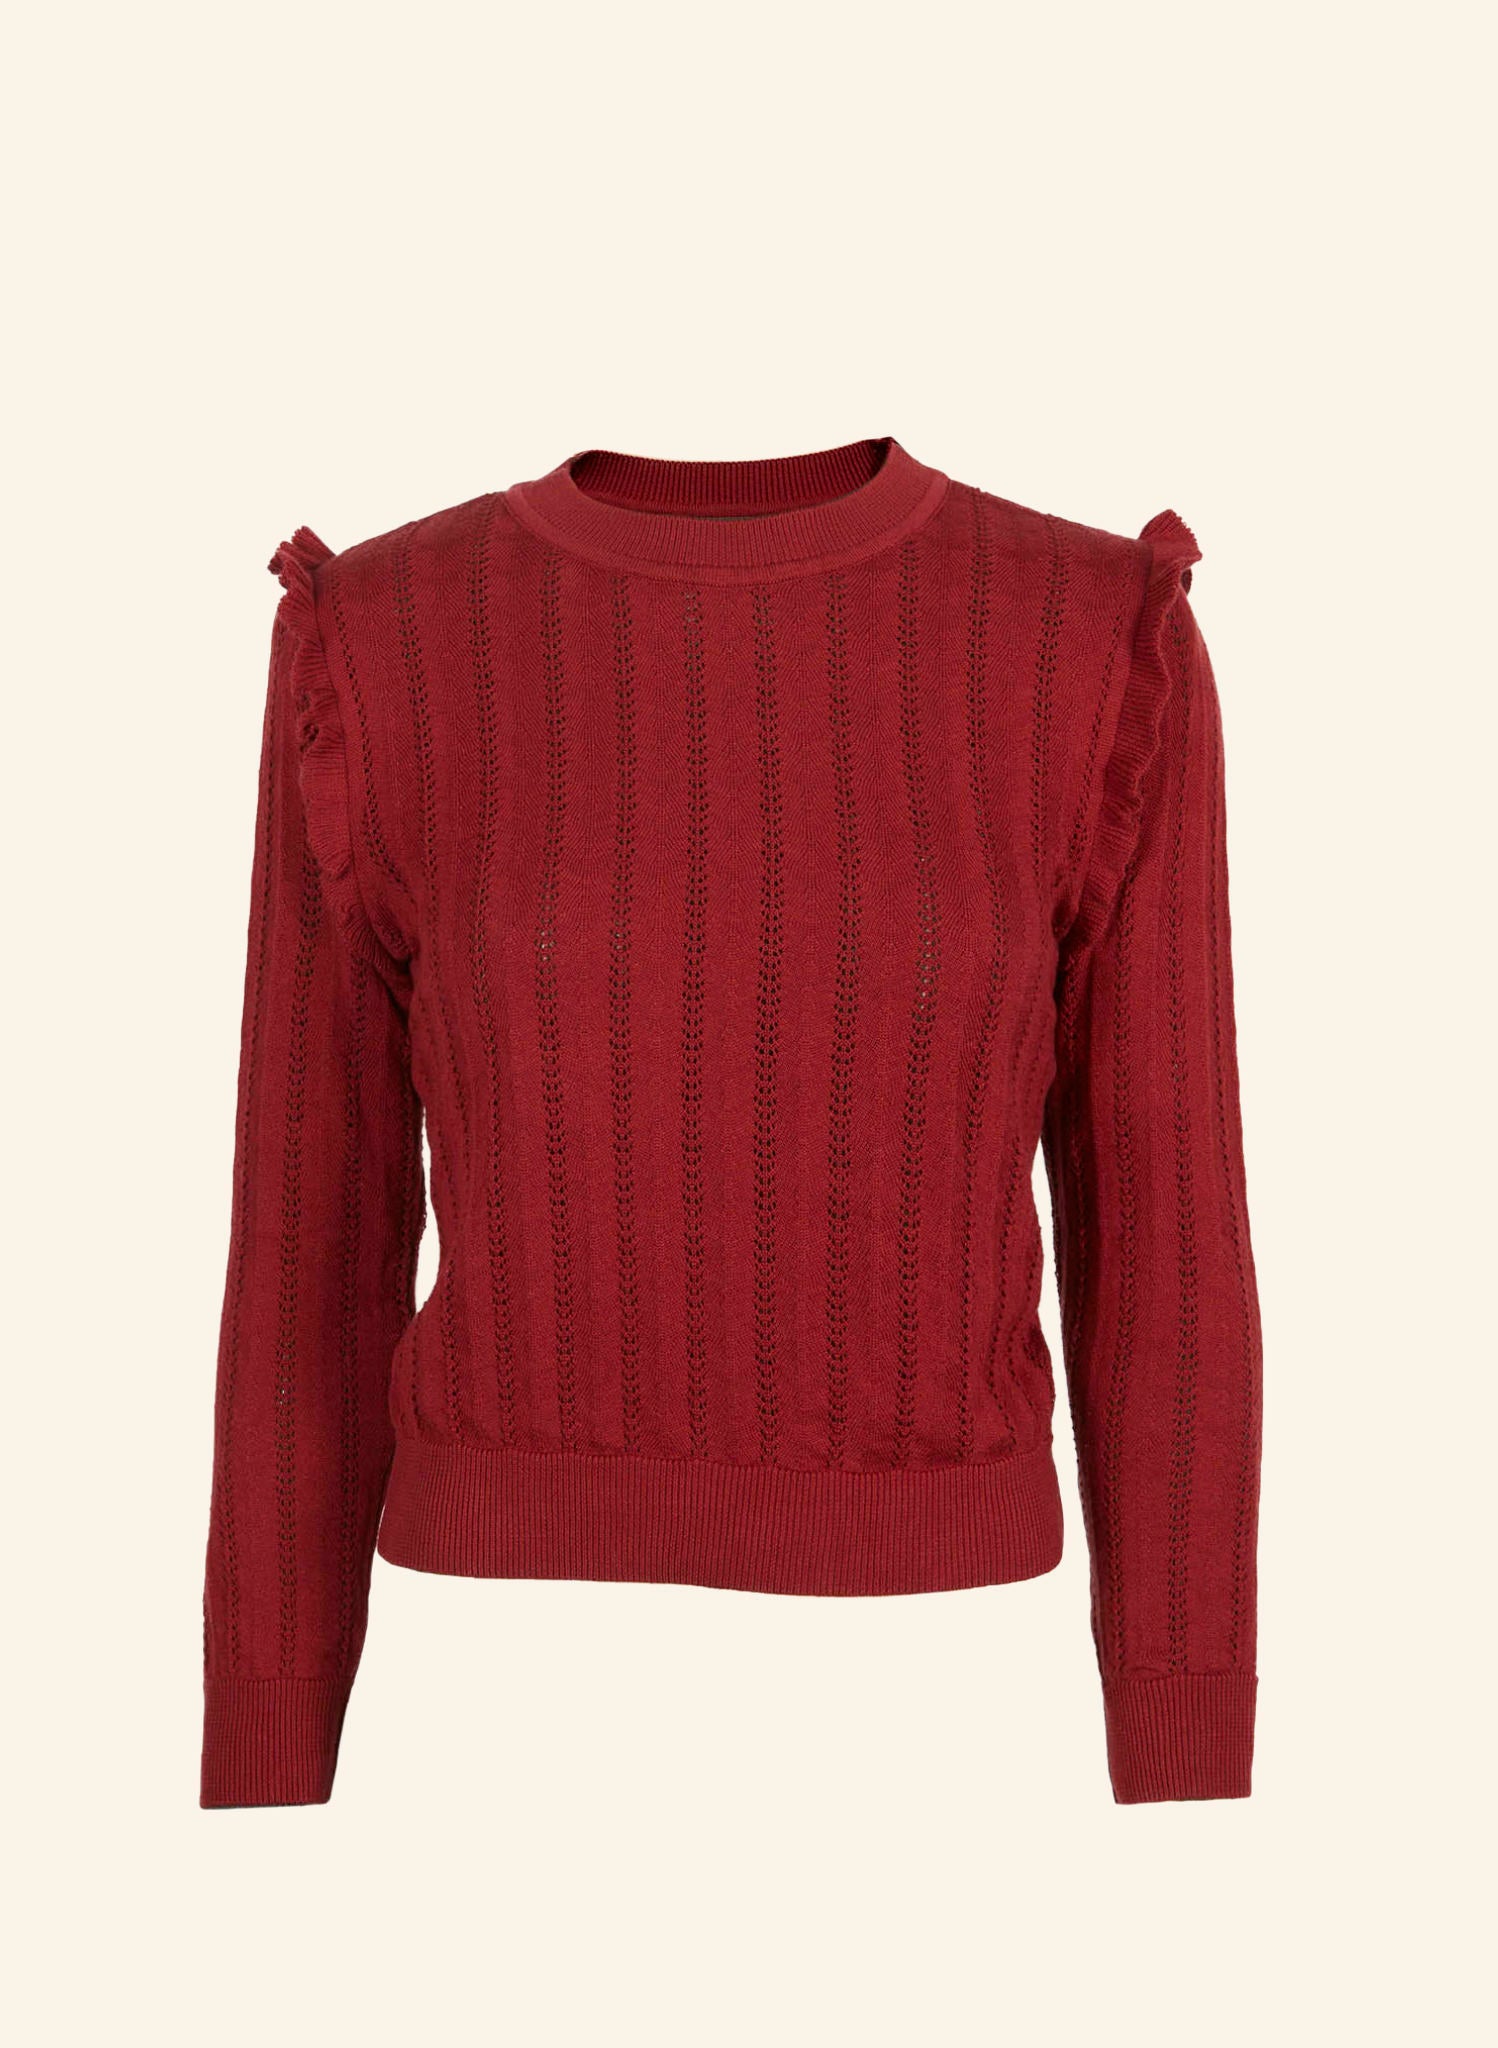 Diana Knitted Cotton Top - Red Ruffle